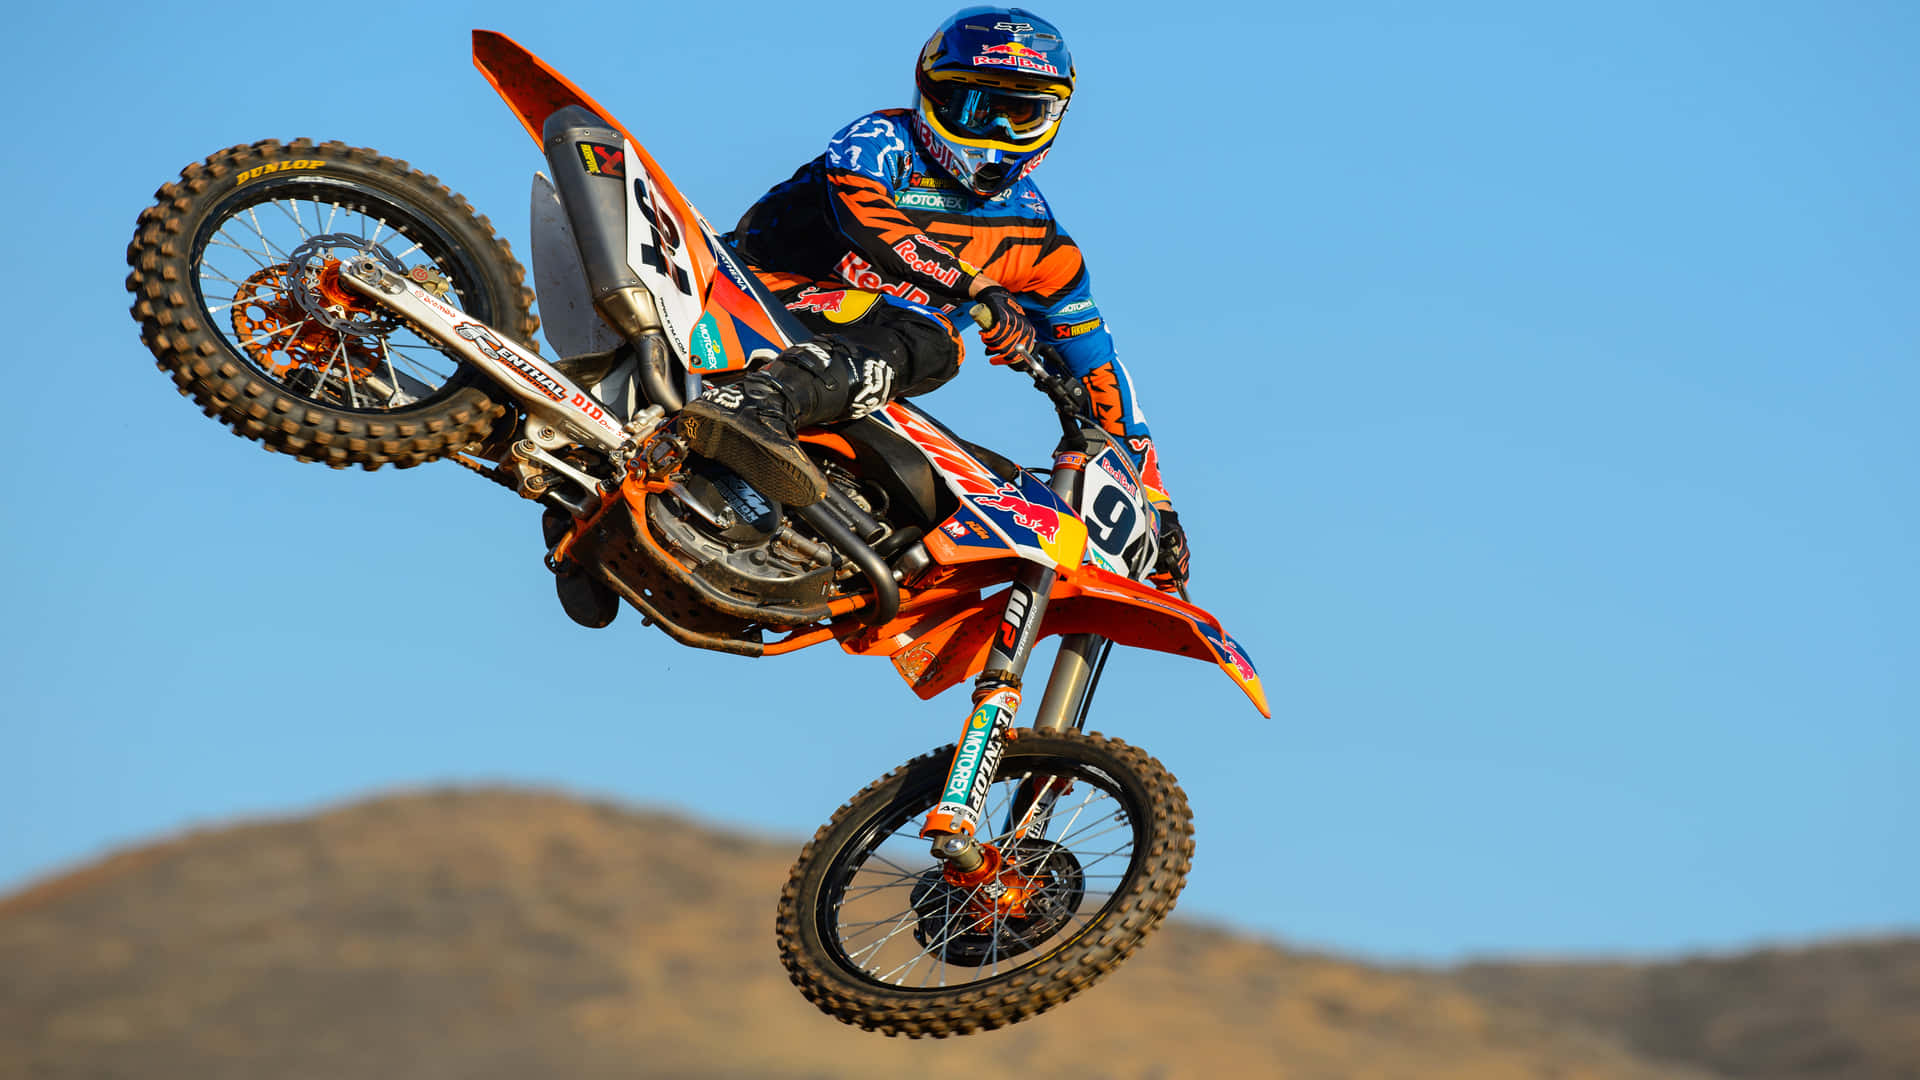 Ride the world with Honda's top-of-the-line dirt bike Wallpaper